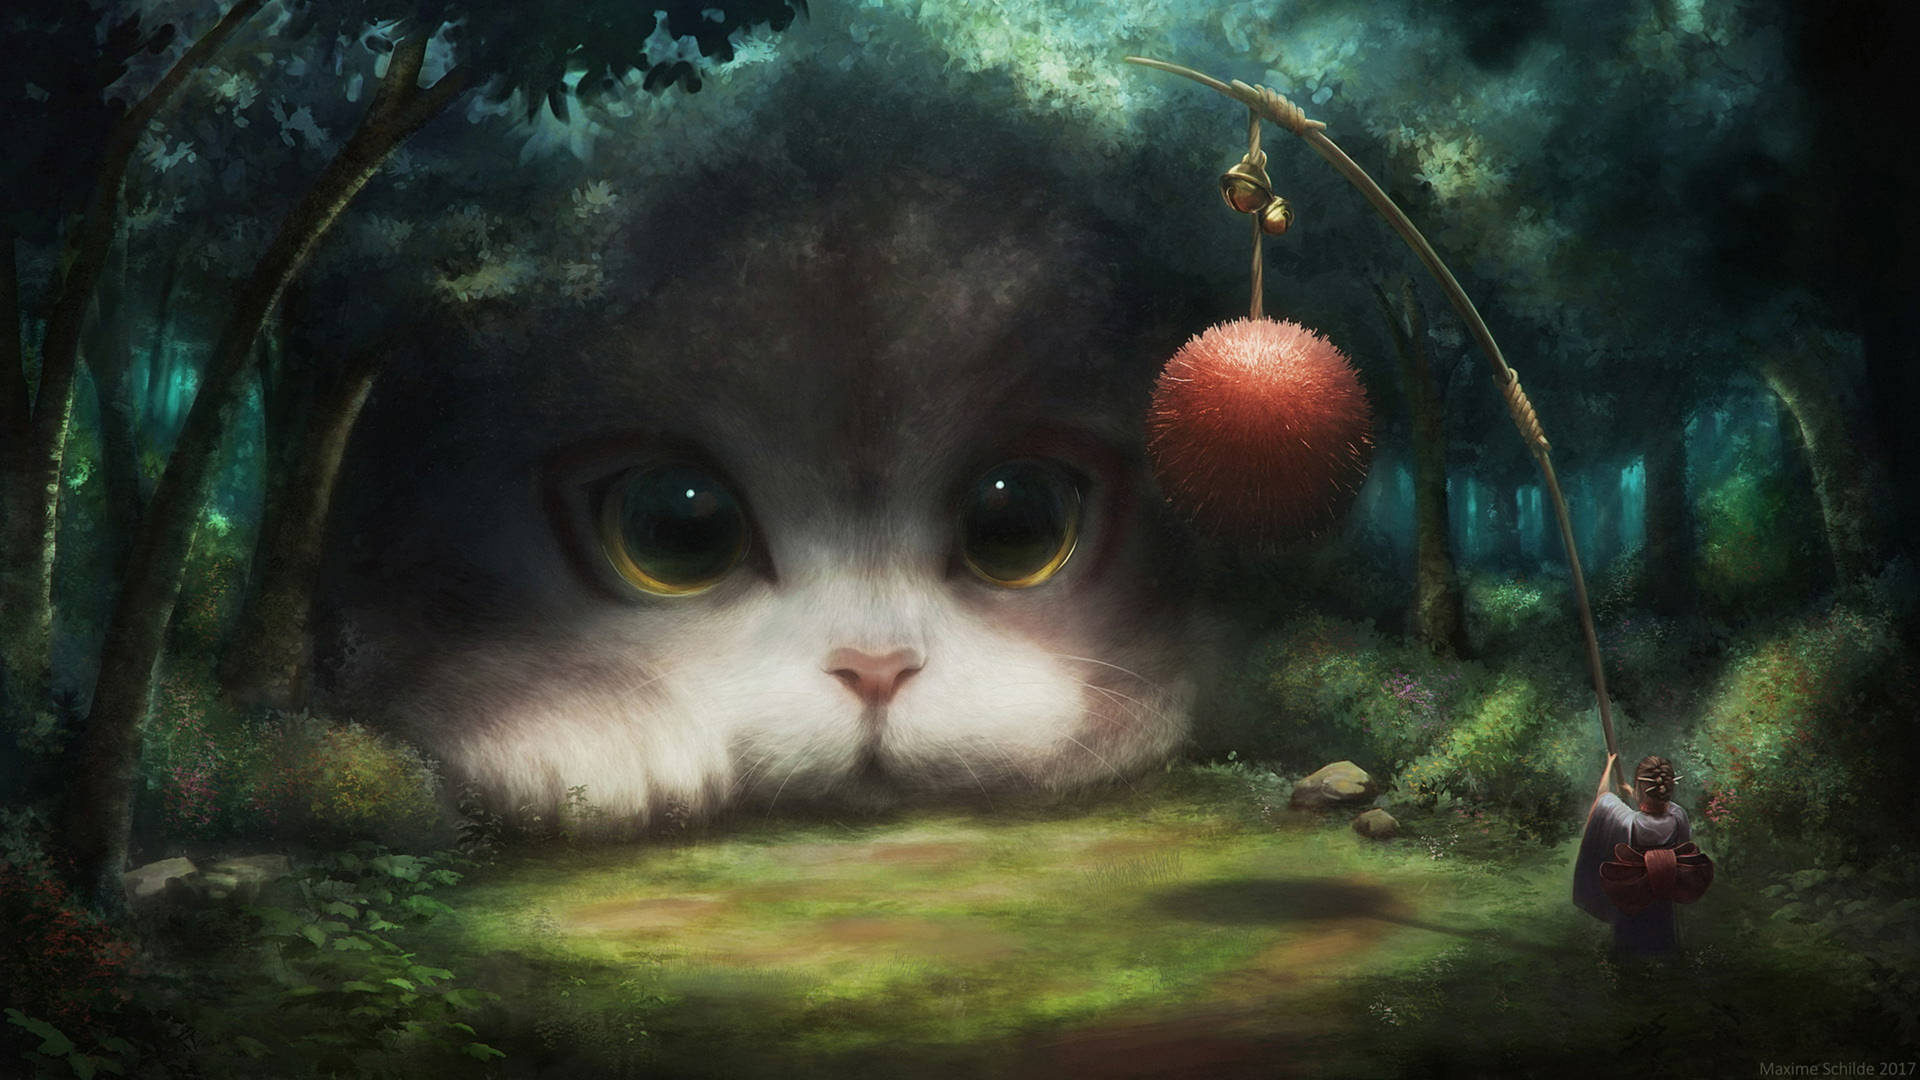 Cat and geisha in forest fantasy art wallpaper.